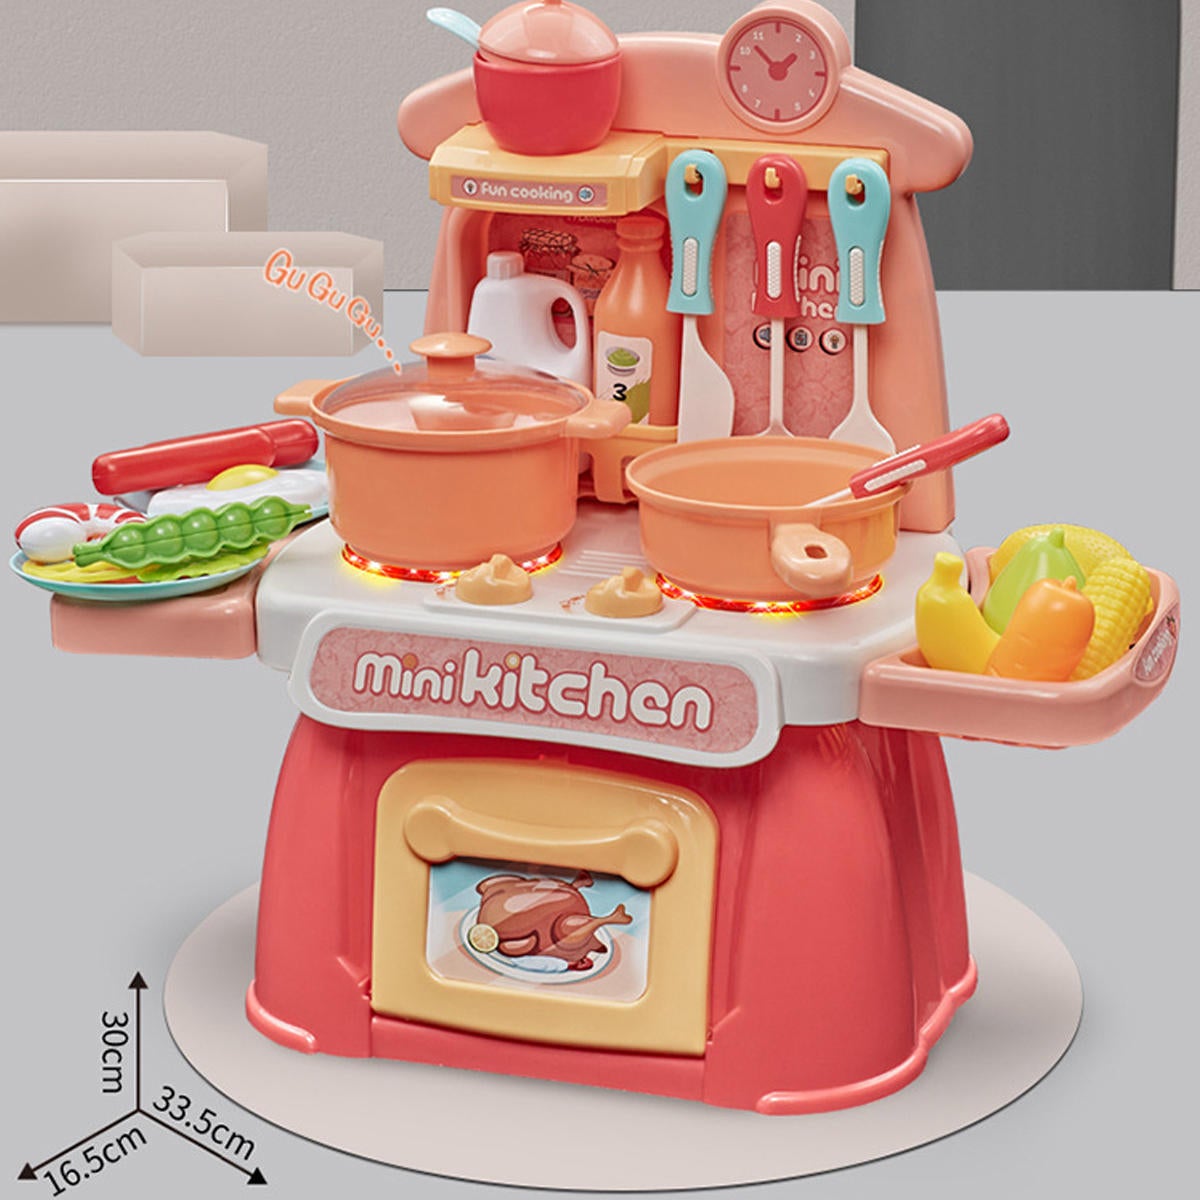 26 IN 1 Kitchen Playset Multifunctional Supermarket Table Toys for Childrens Gifts